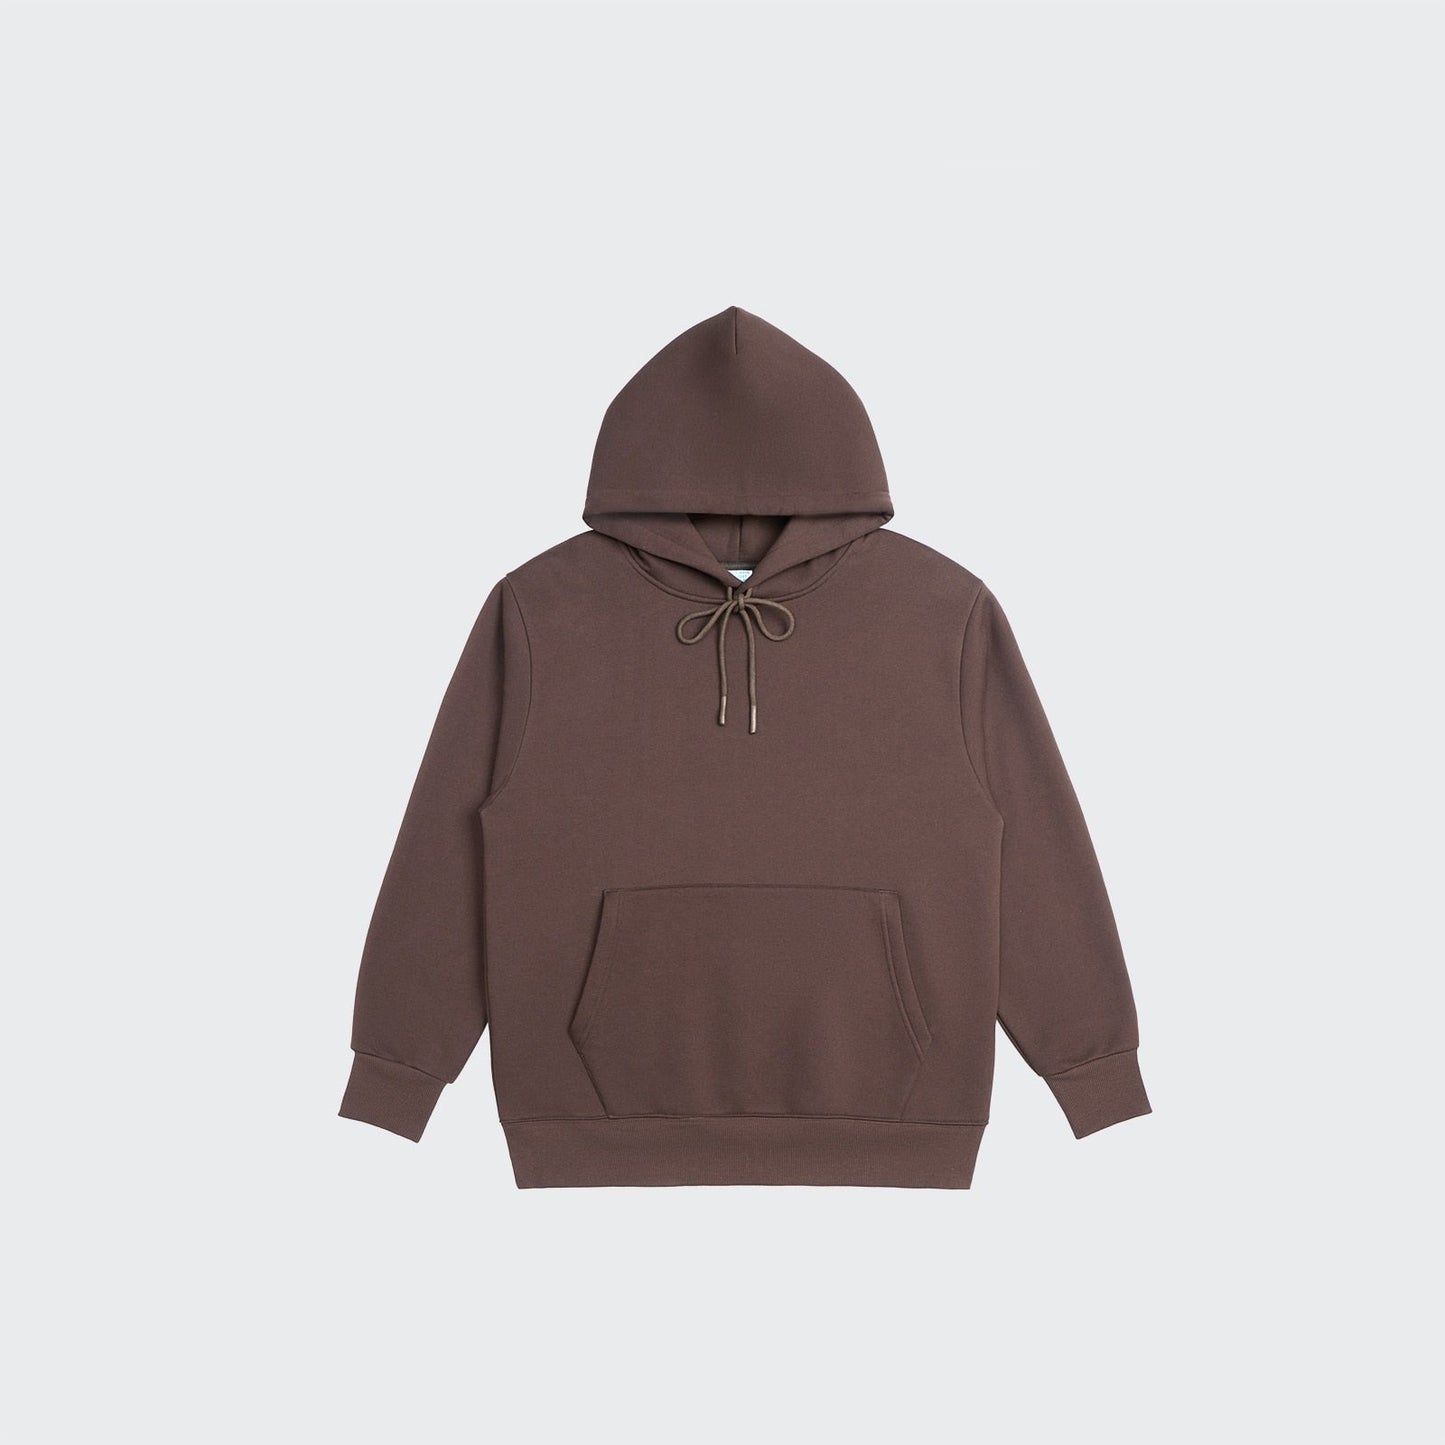 New York Pullover – Stashed NY